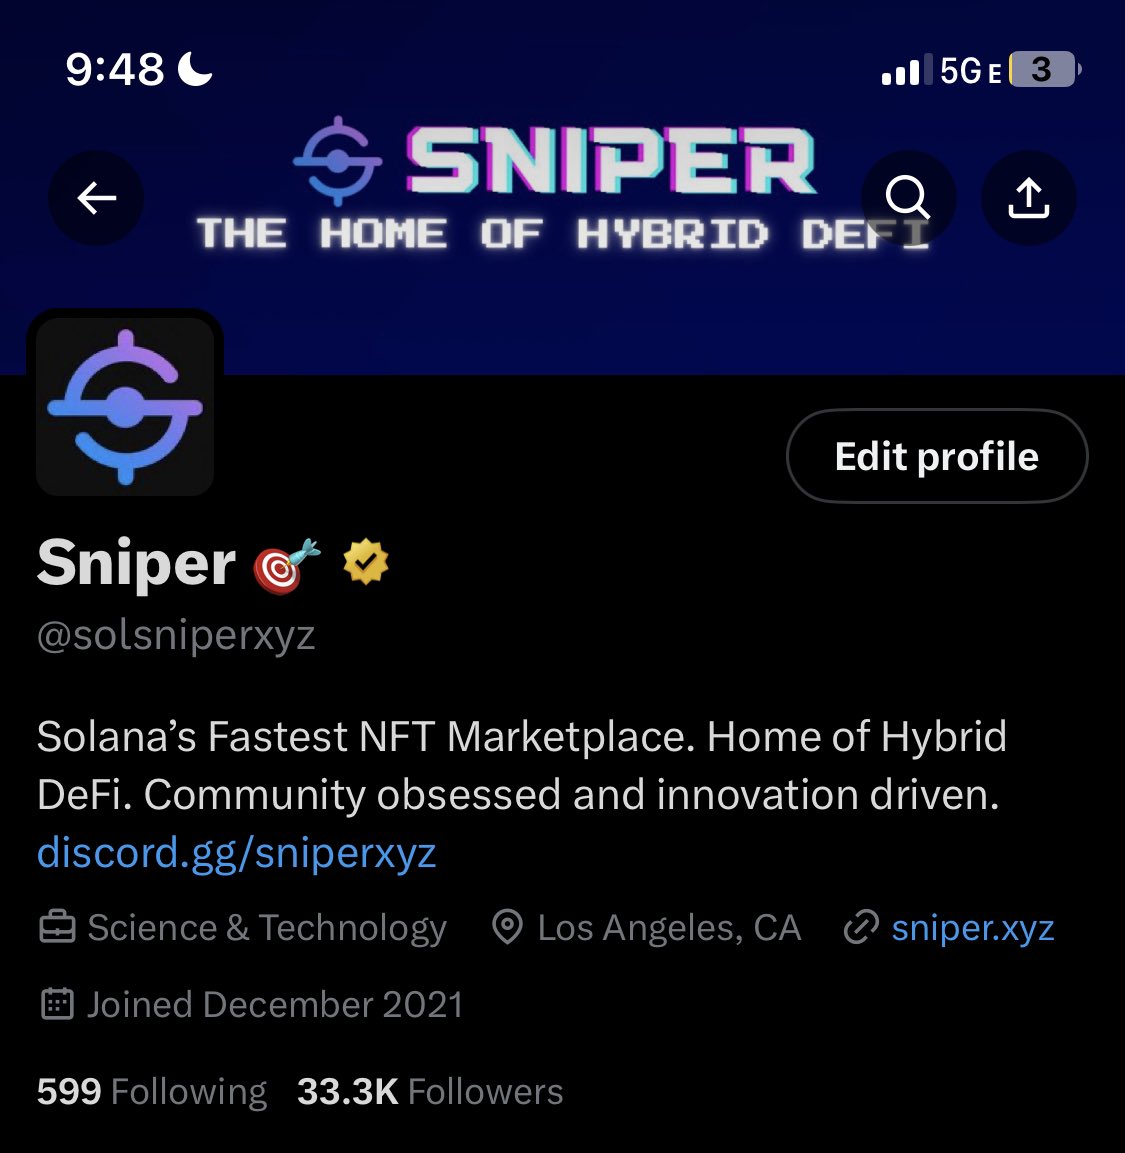 Thank you everyone for 33.3k followers

I think it’s a sign 🙏